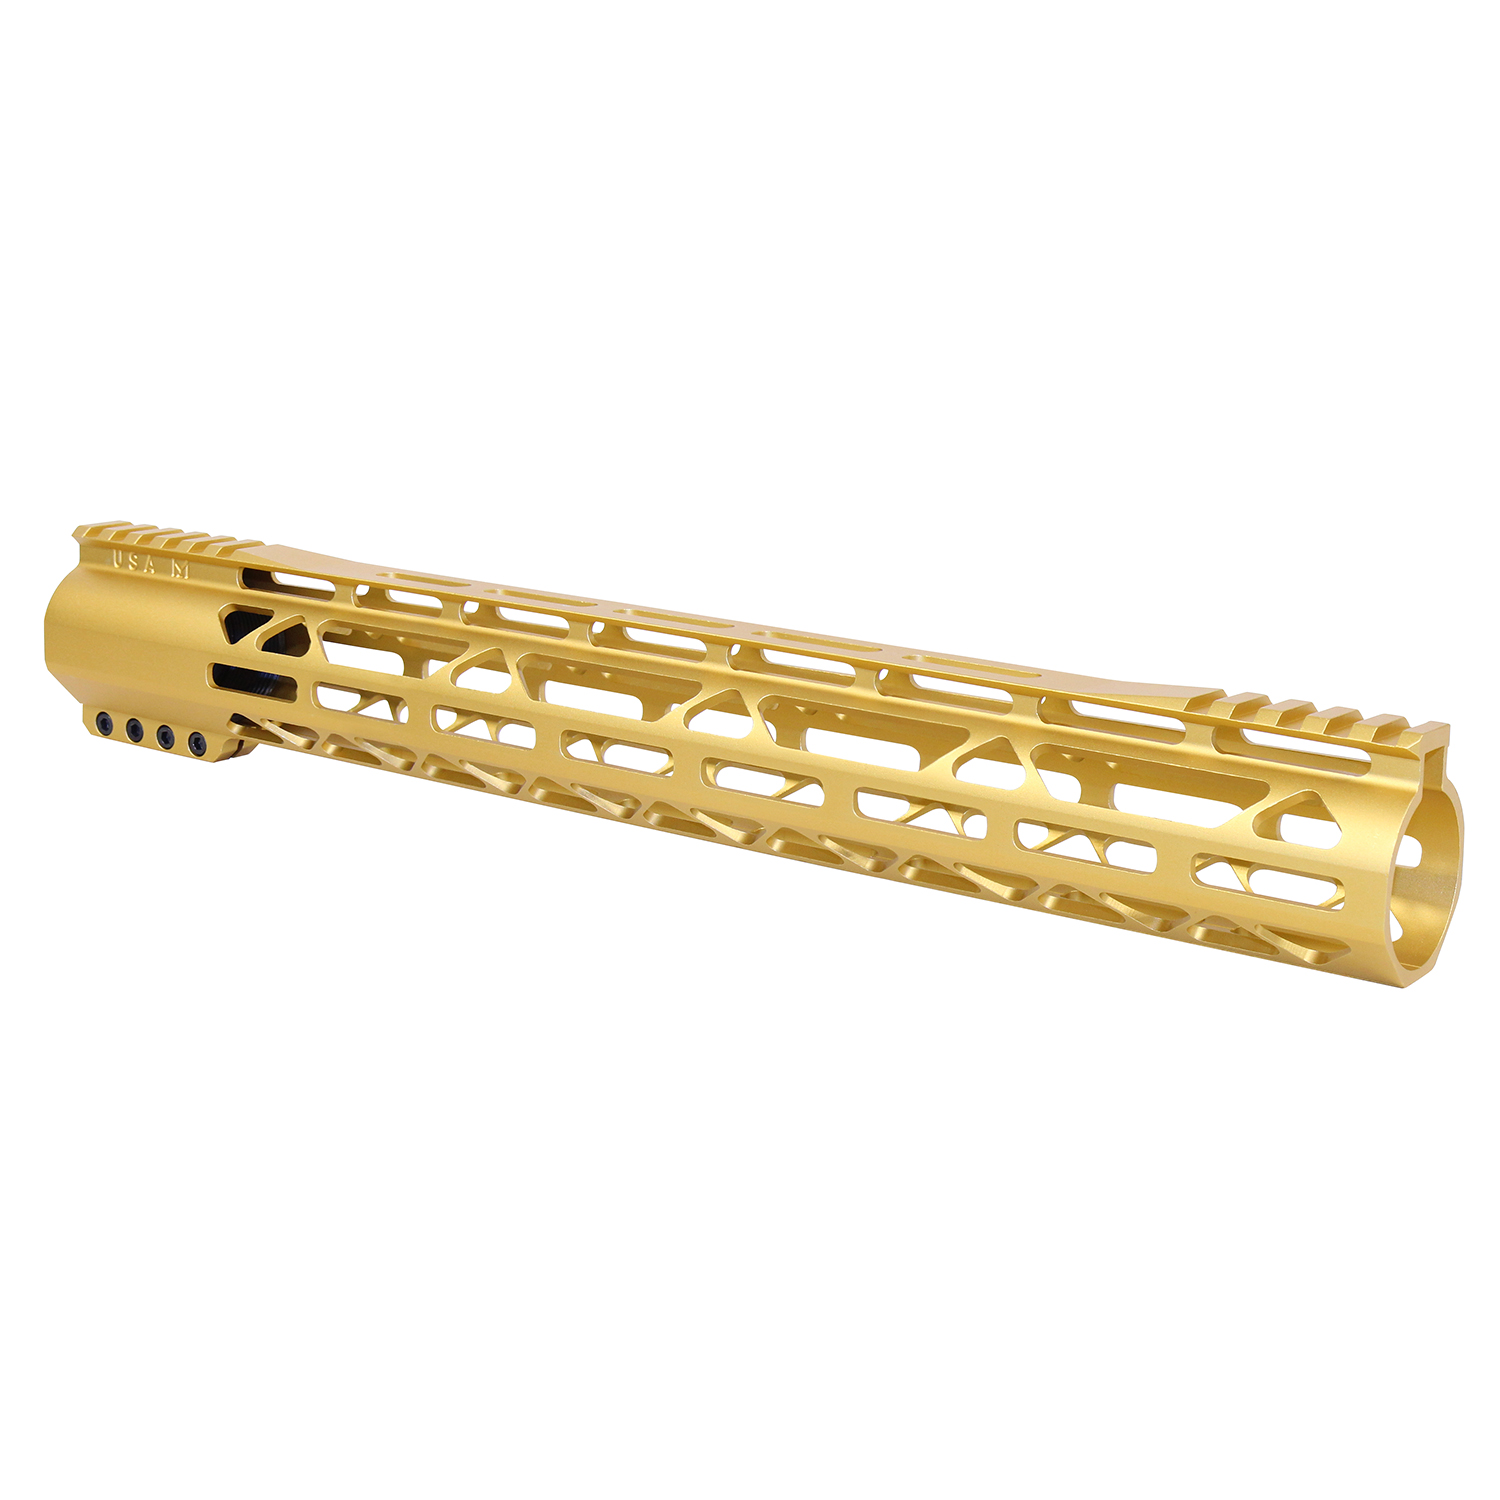 AR-308 15" AIR-LOK Series M-LOK Compression Free Floating Handguard With Monolithic Top Rail (Gen 2) (Anodized Gold)